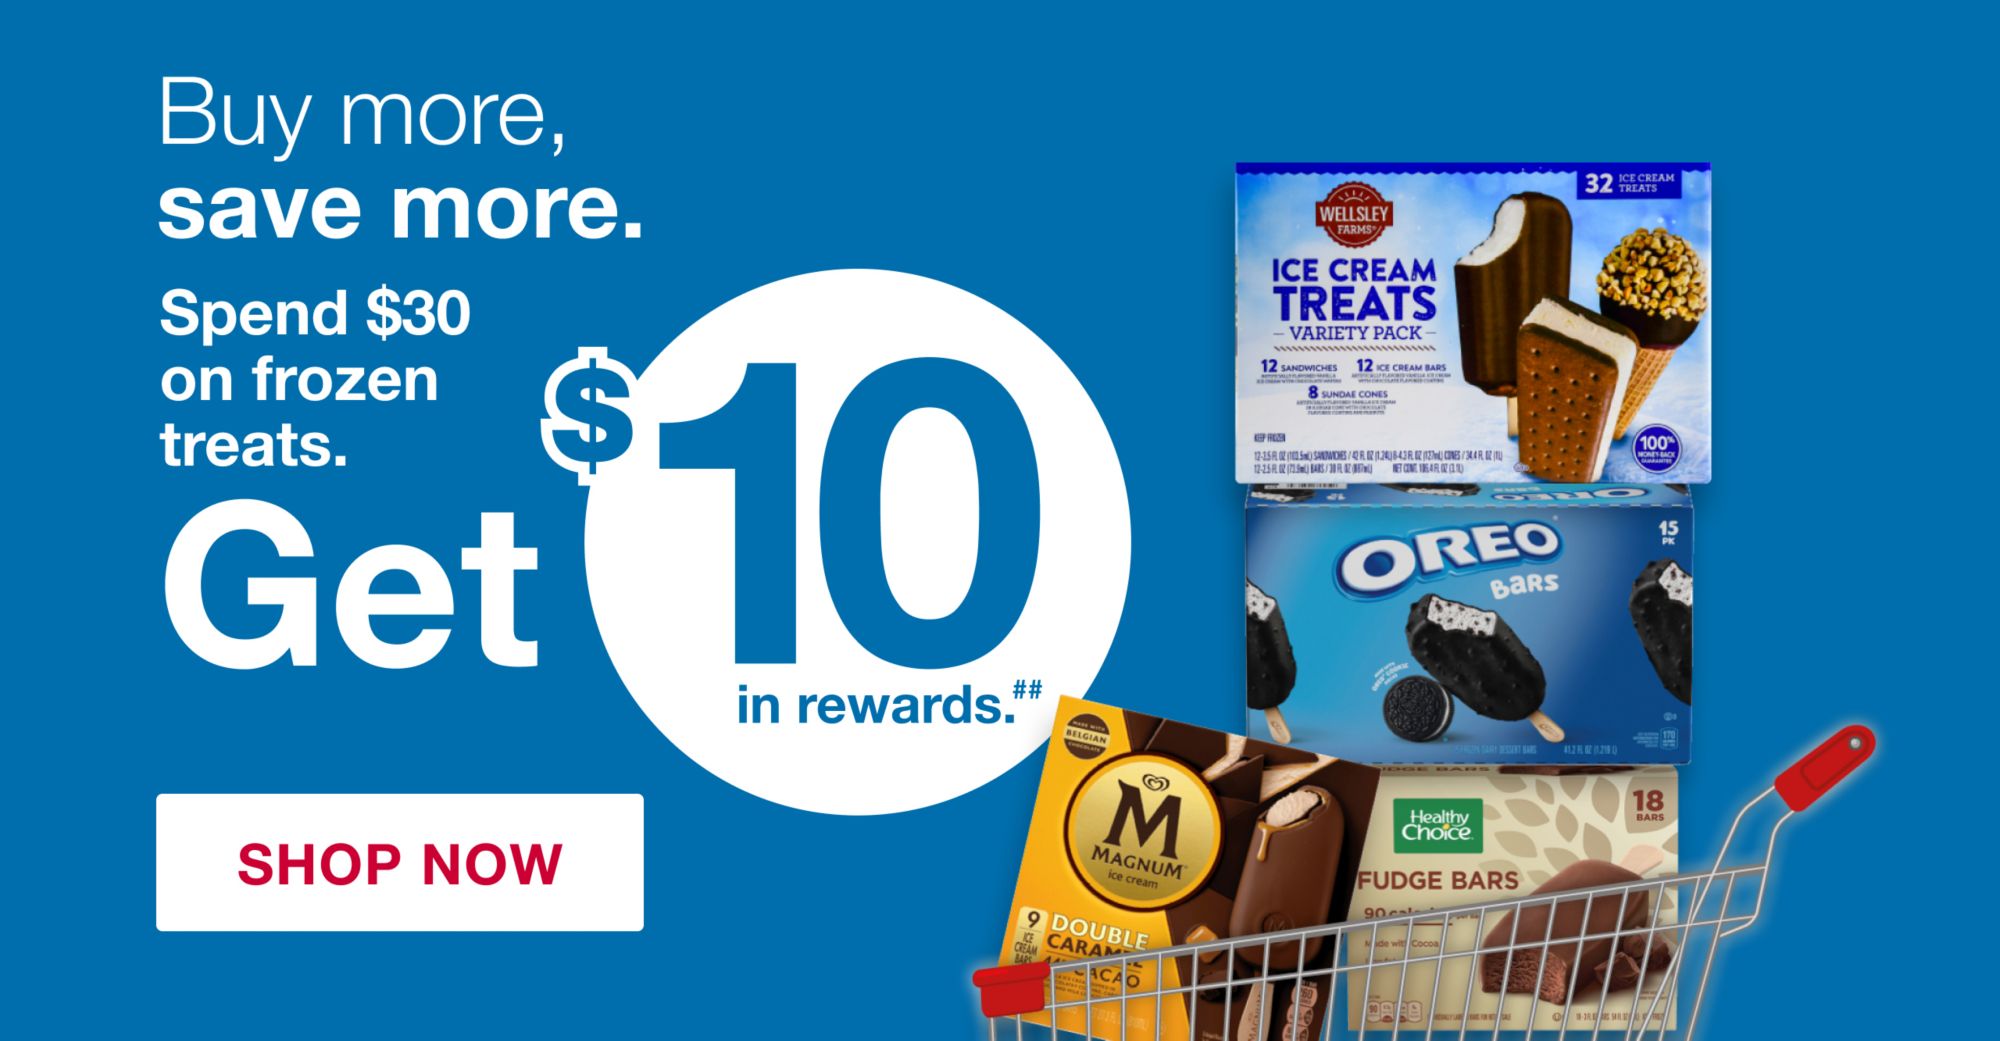 Buy more, save more. Spend $30 on frozen treats. Get $10 in rewards.** Click to shop now